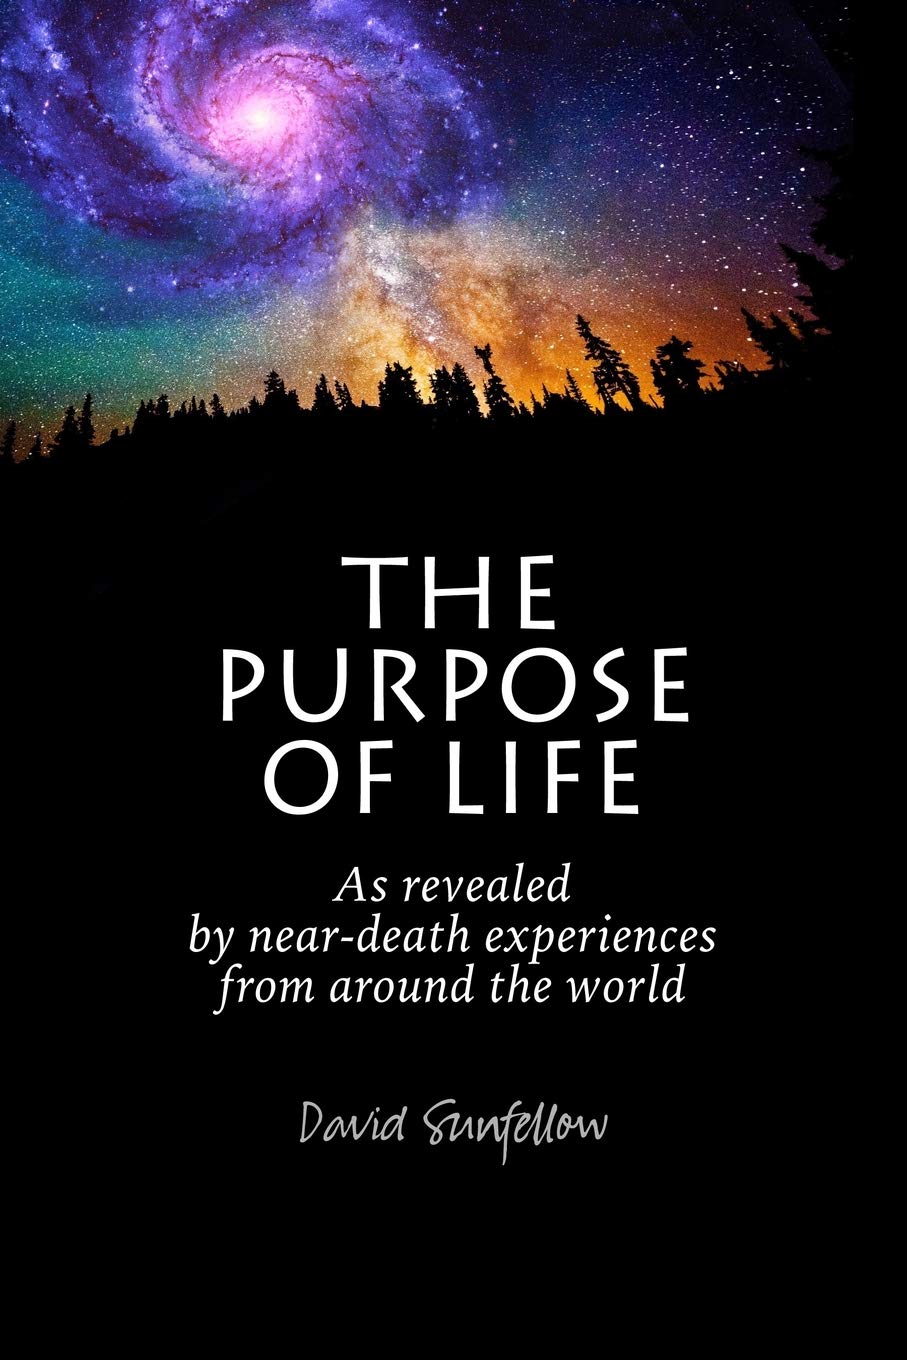 The Purpose of Life as Revealed by Near-Death Experiences from Around the World, by David Sunfellow - Near-Death Experience (NDE) Books - NDE Book Reviews on Survival.ark.net.au